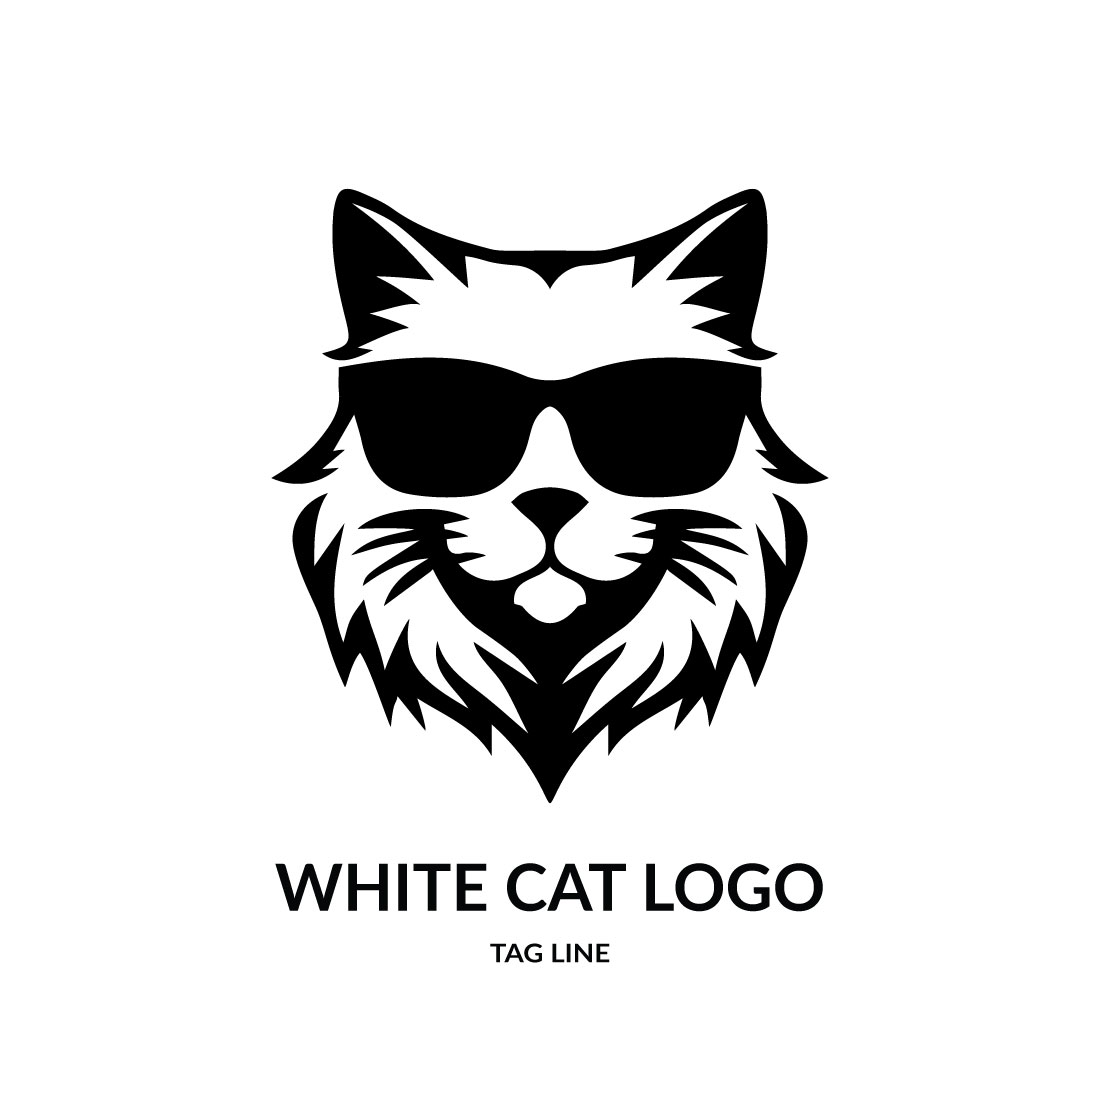 White Cat Logo Template cover image.